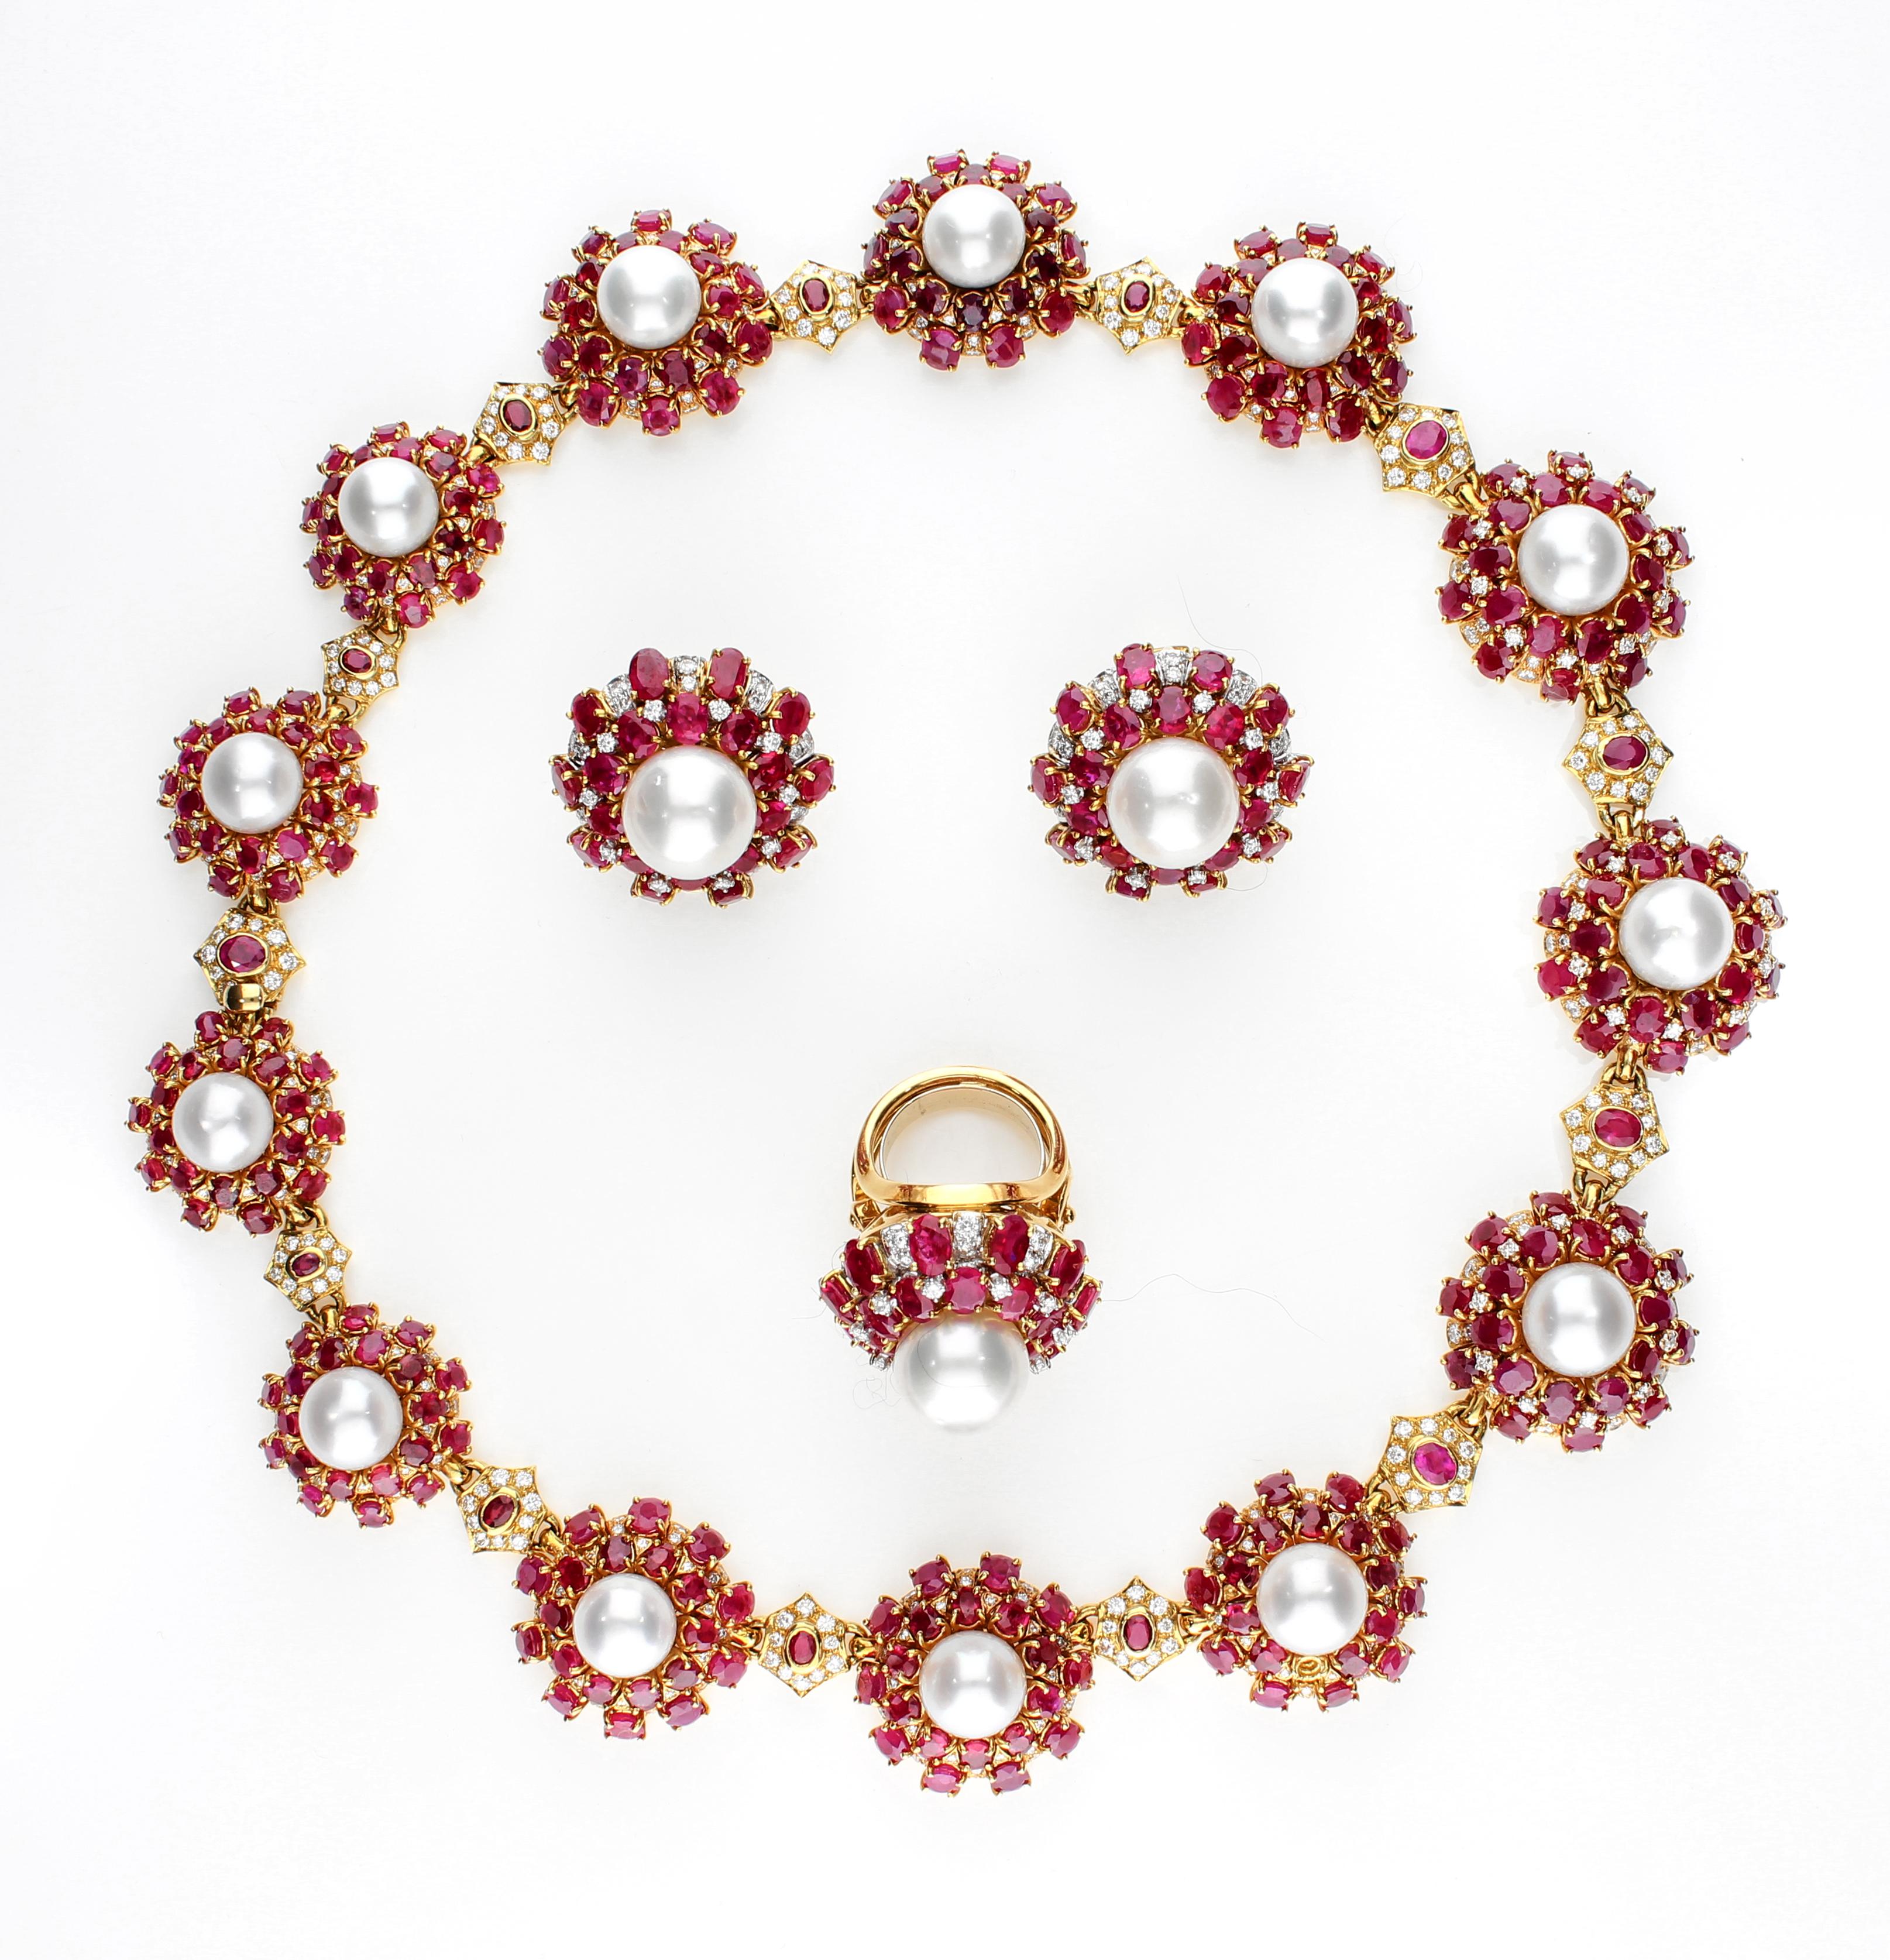 Retro Parure with Rubies, Pearls and Diamonds in 18 Karat Yellow Gold